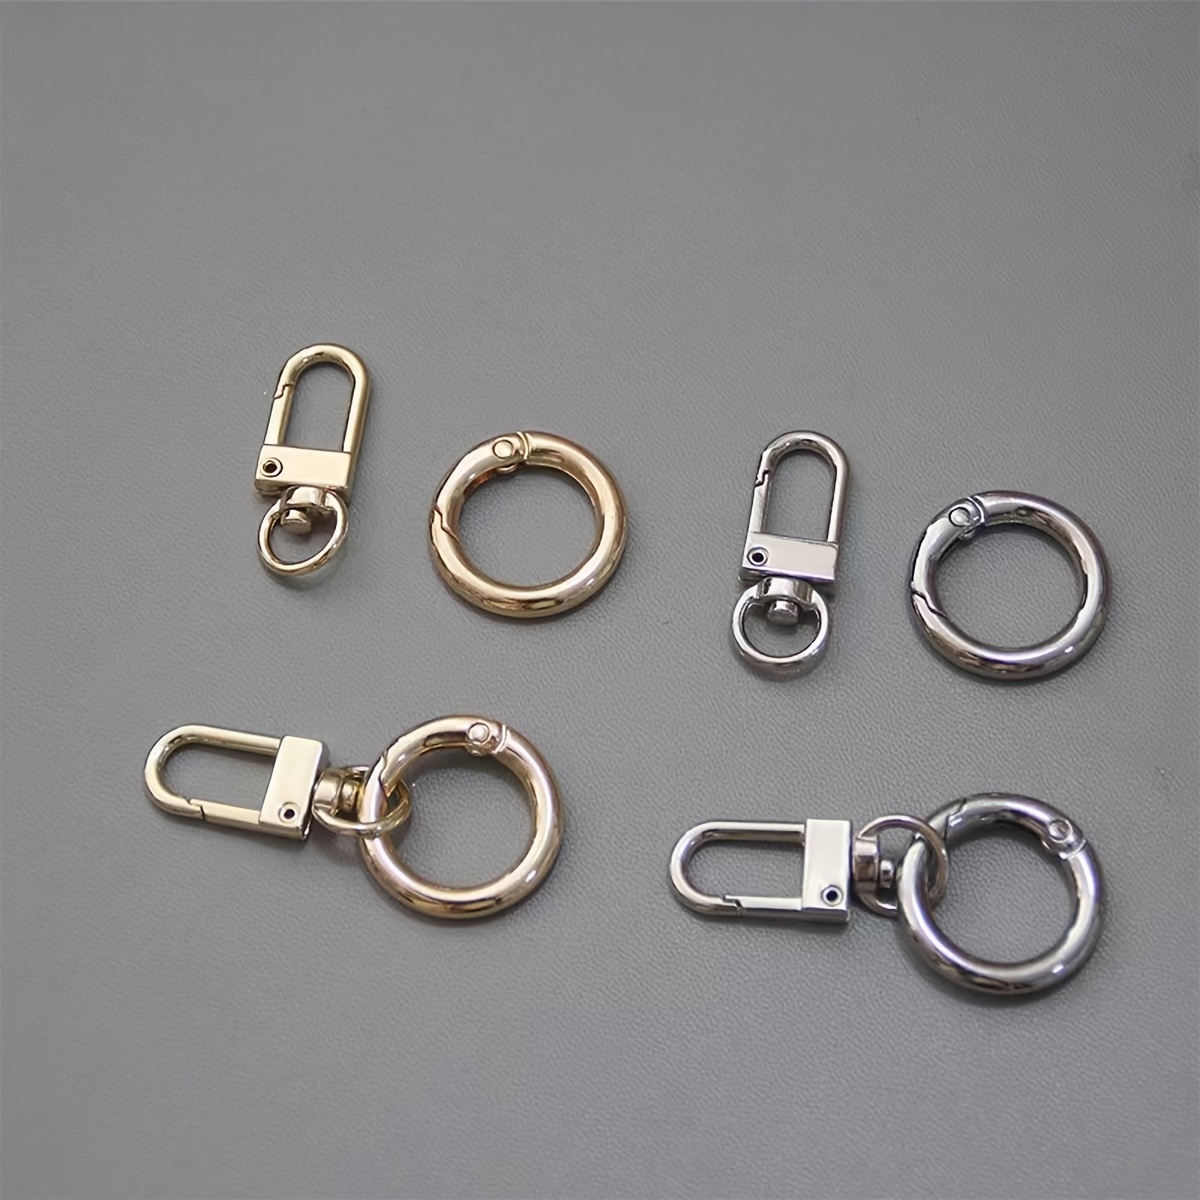 Silver/gold Metal Square Swivel Clasp, Keychain Lobster Clasp, Lobster Claw  Spring Clasp Clip, Bag Handware Hook Key Clasp 12x33mm 